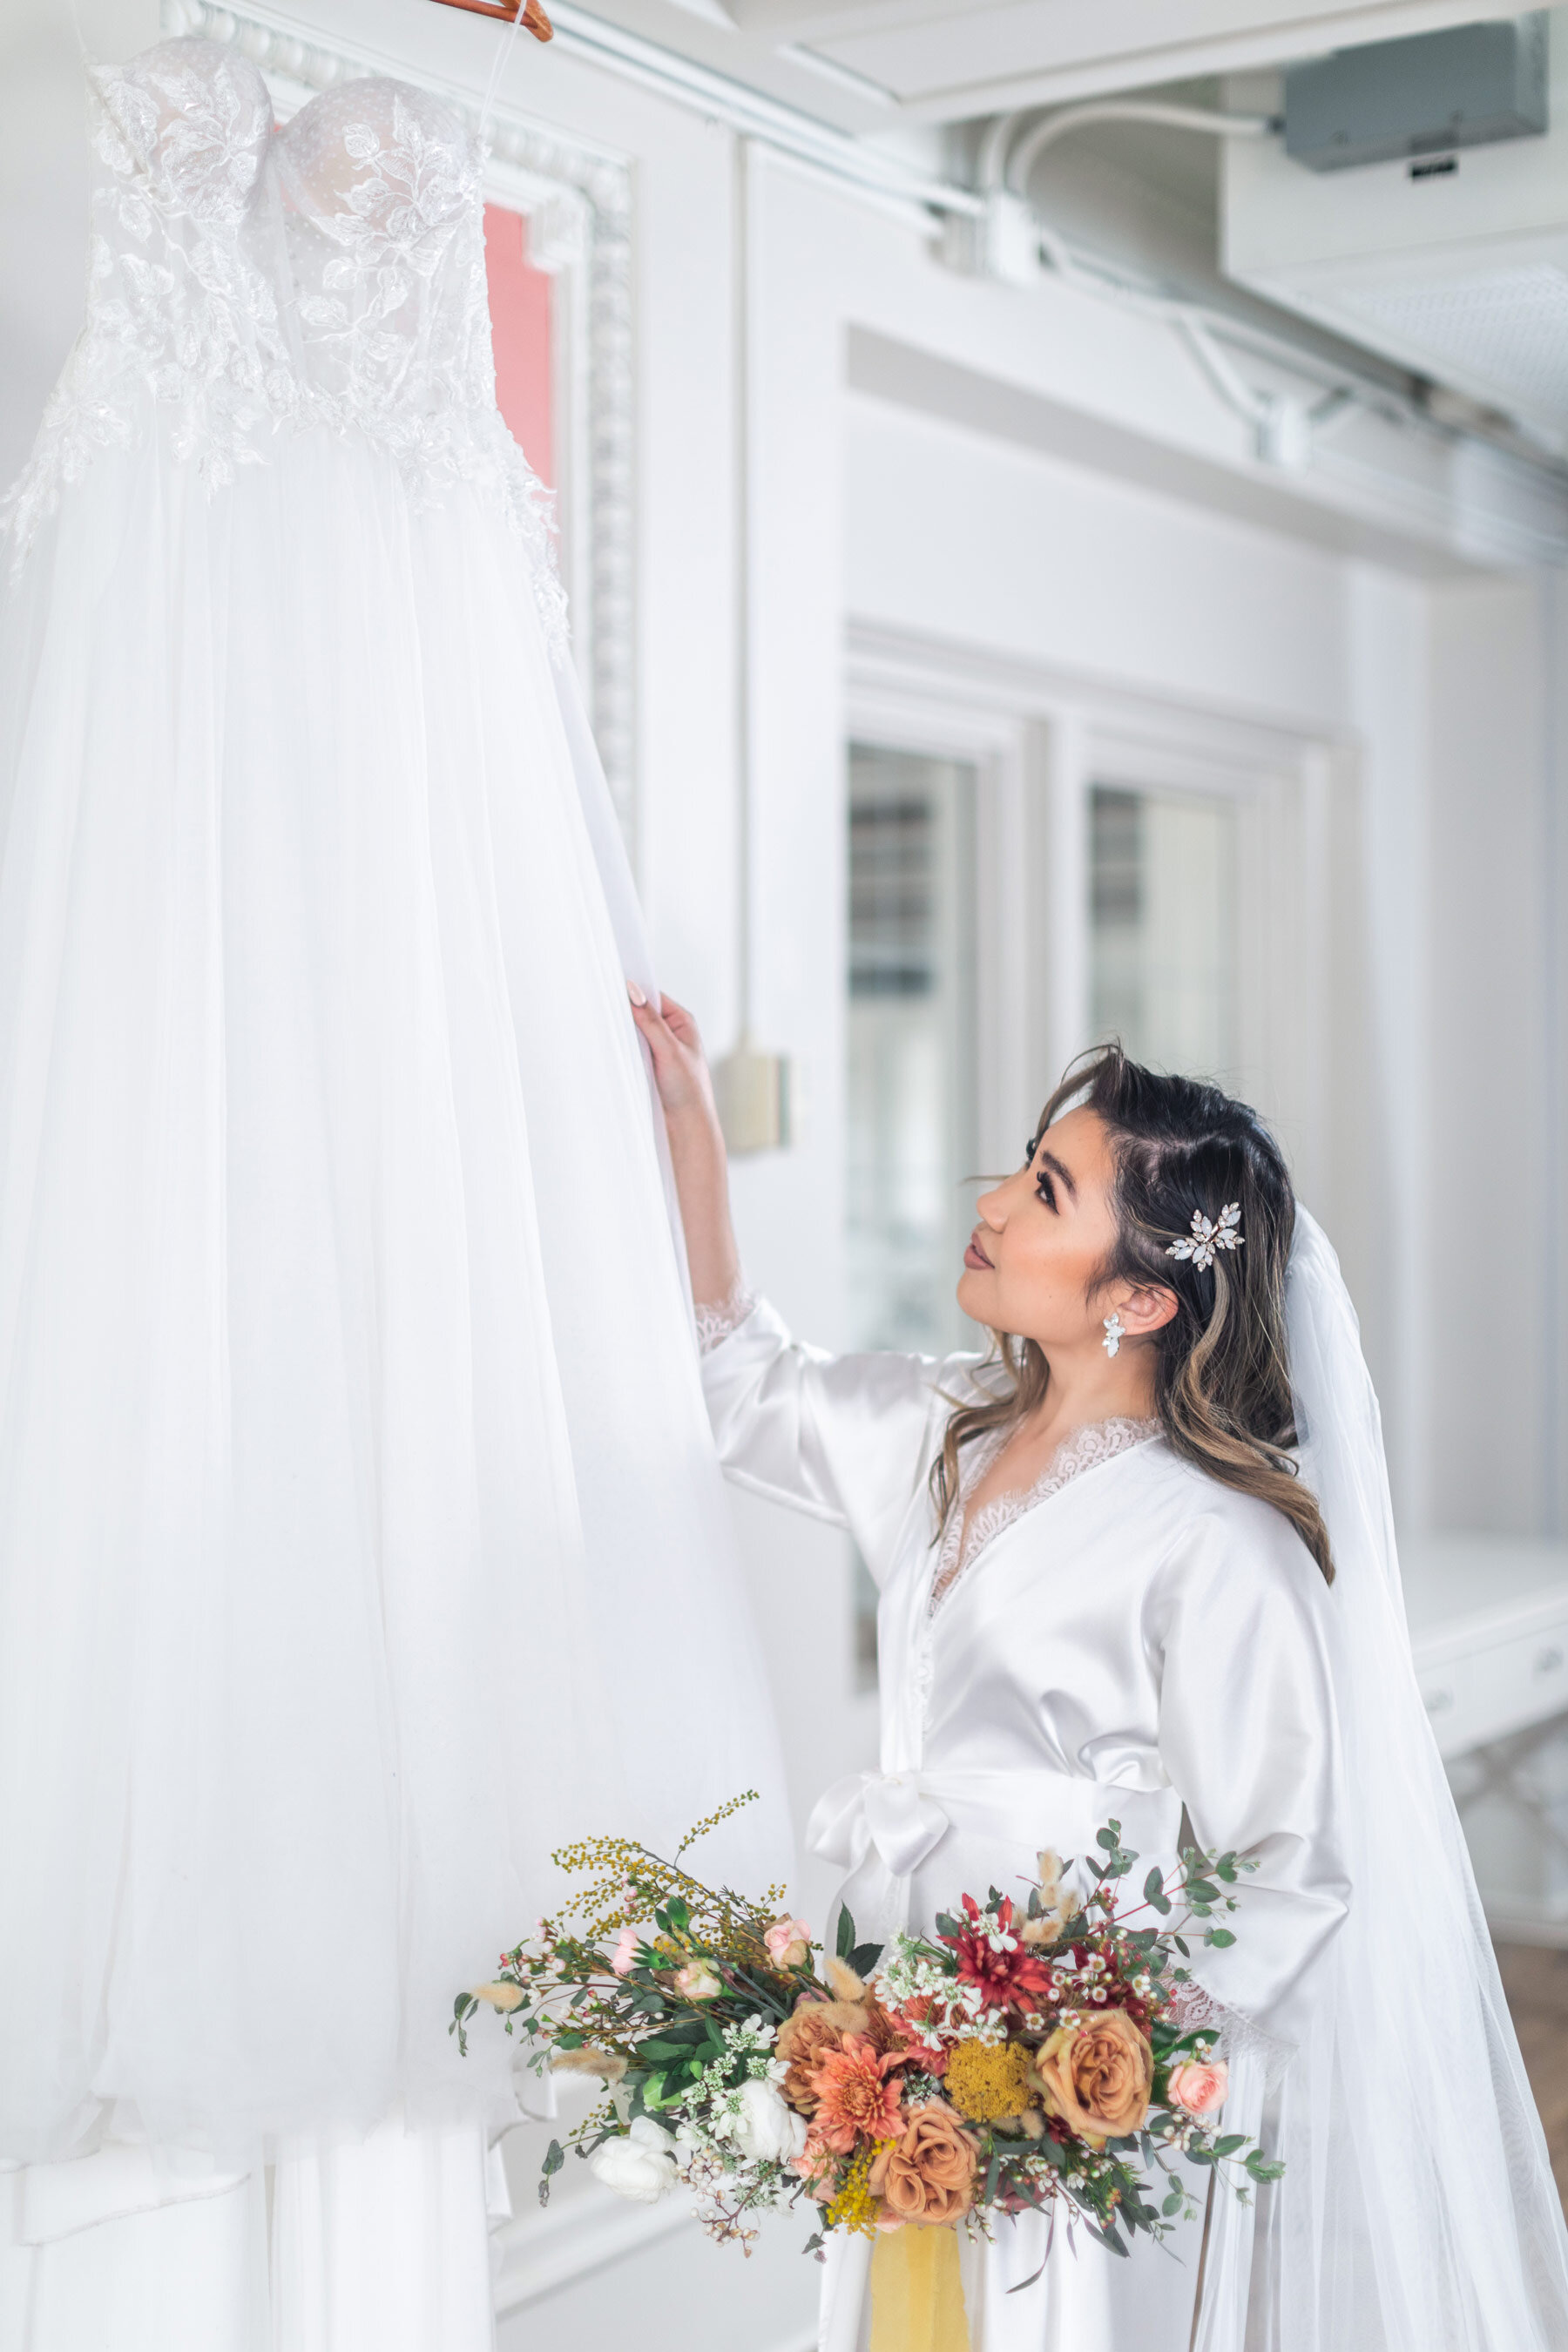  Utah County wedding photographer, Clarity Lane captures this bride on her wedding morning staring up at her wedding dress. strapless corset lace wedding dress bride on wedding morning in silk robe Utah county wedding photographer #ClarityLane #Weddi